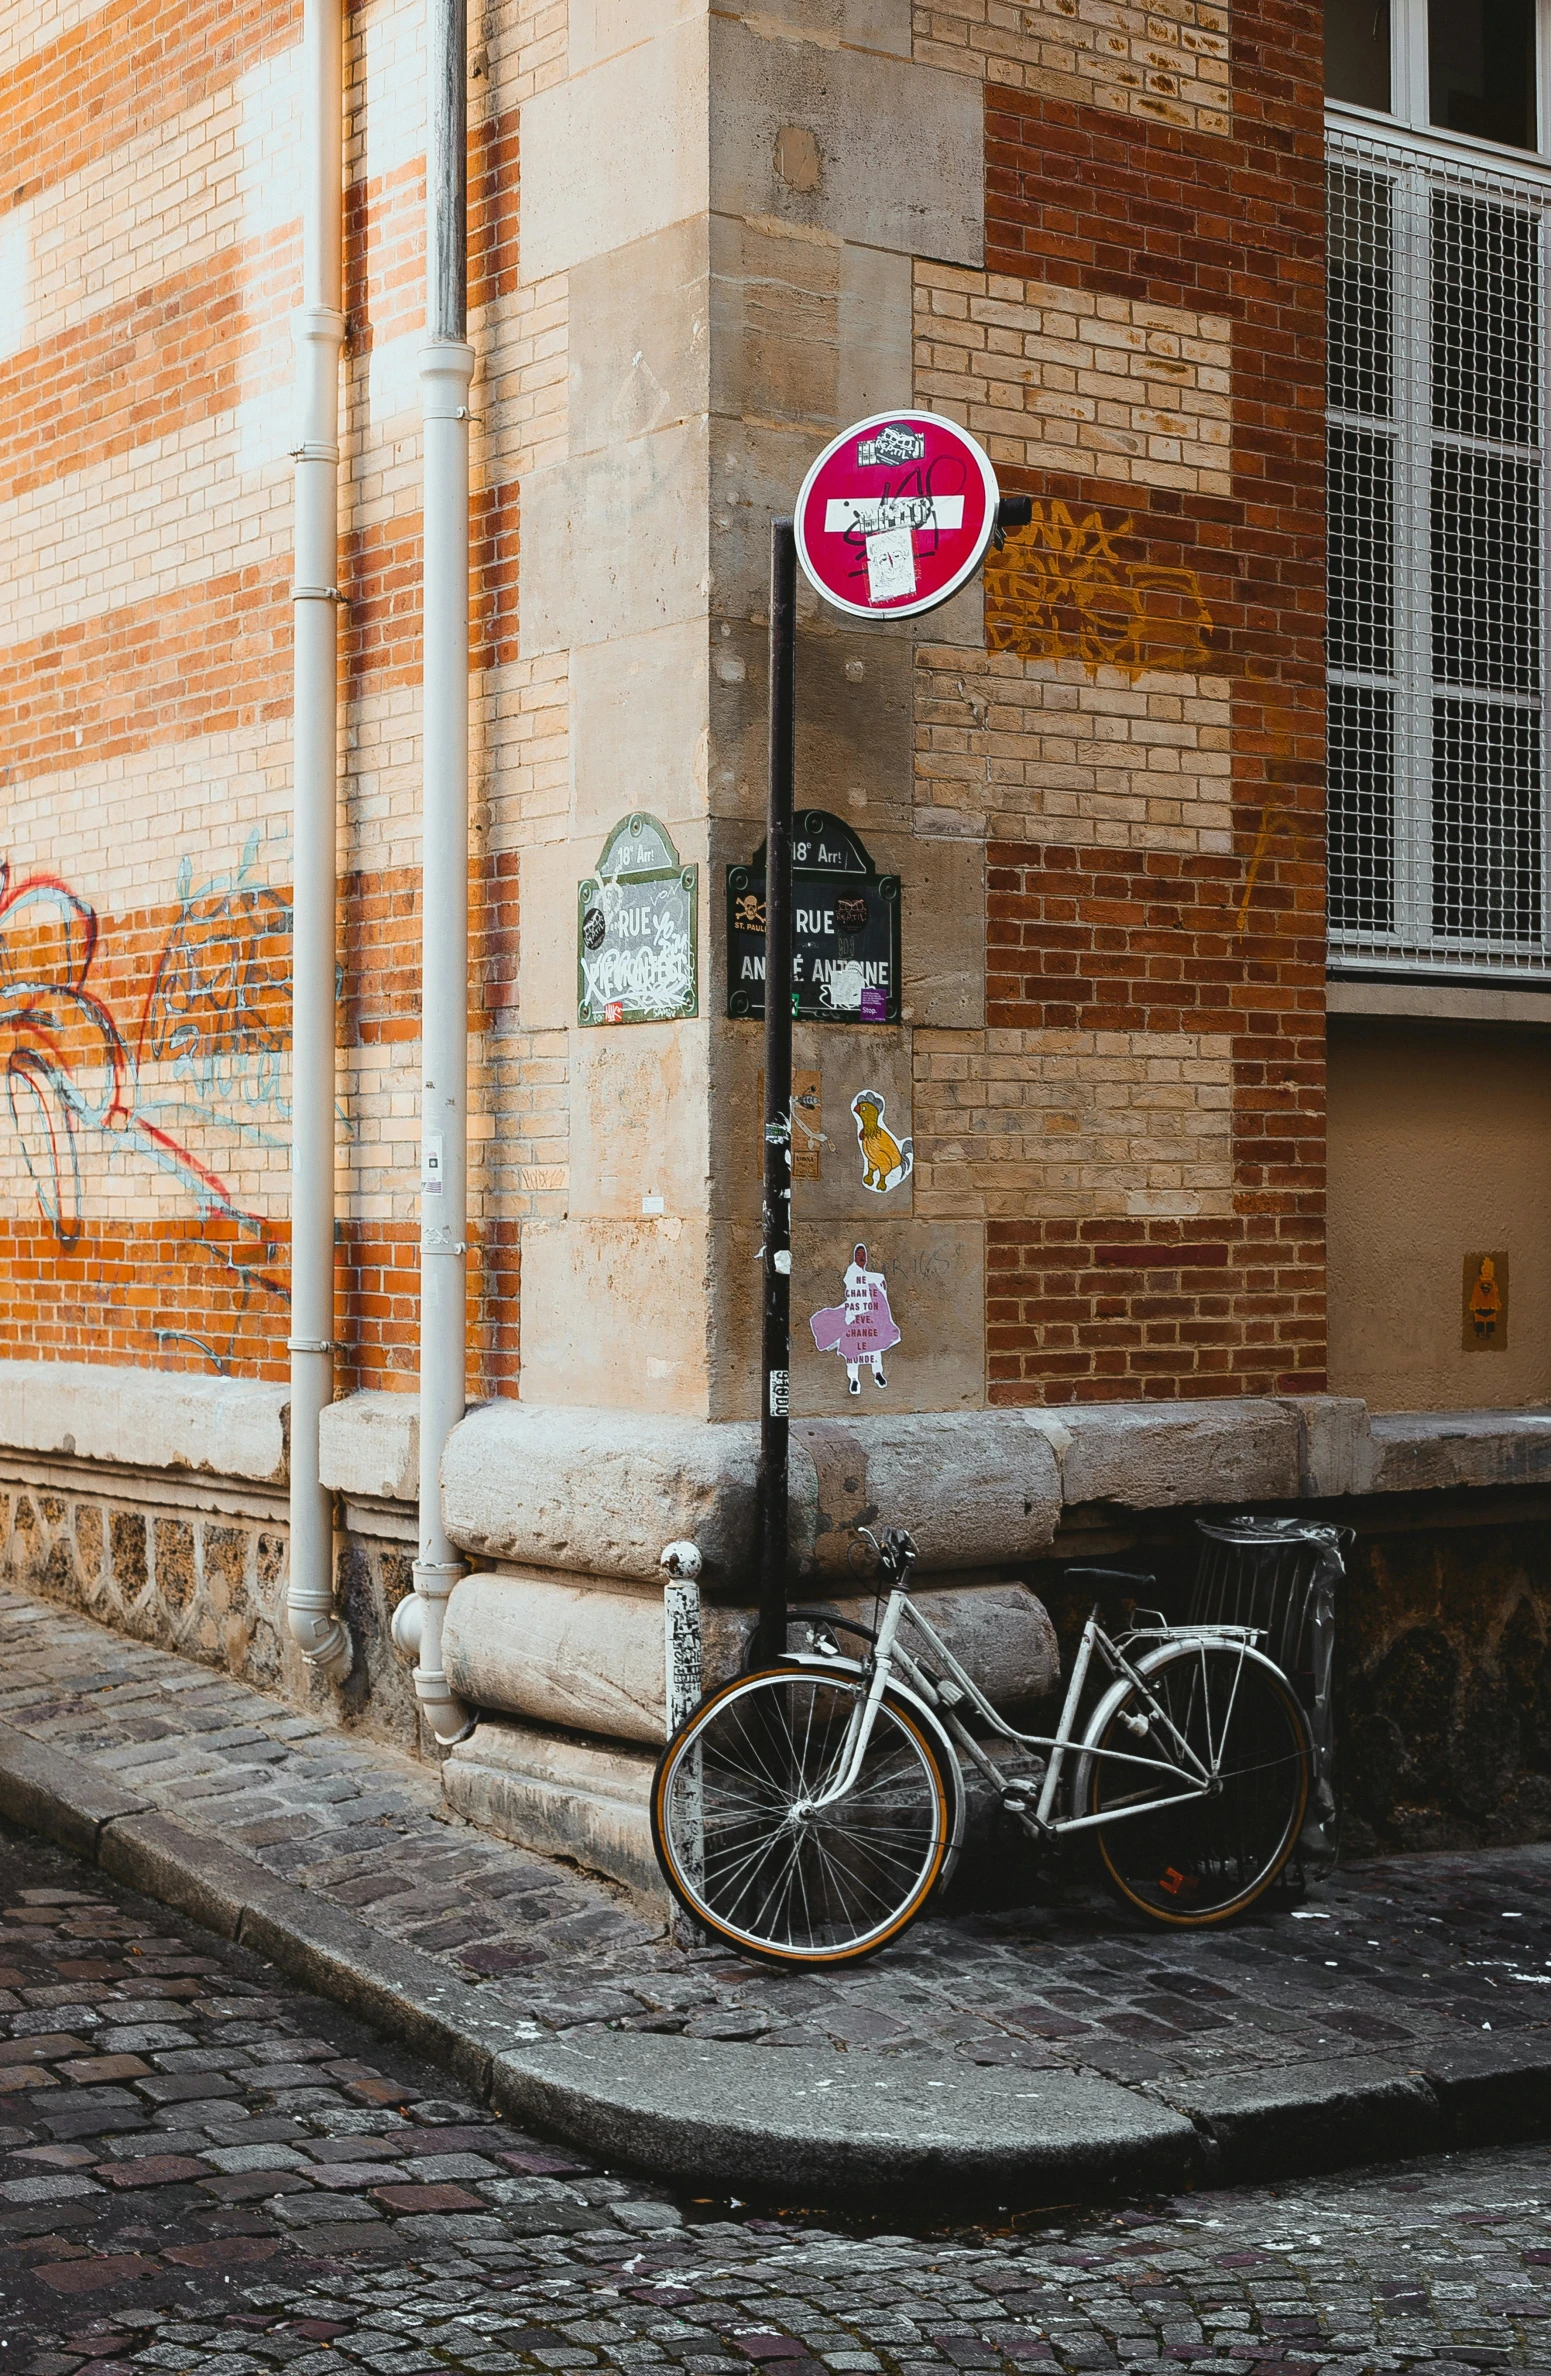 a bike is leaning against a brick building